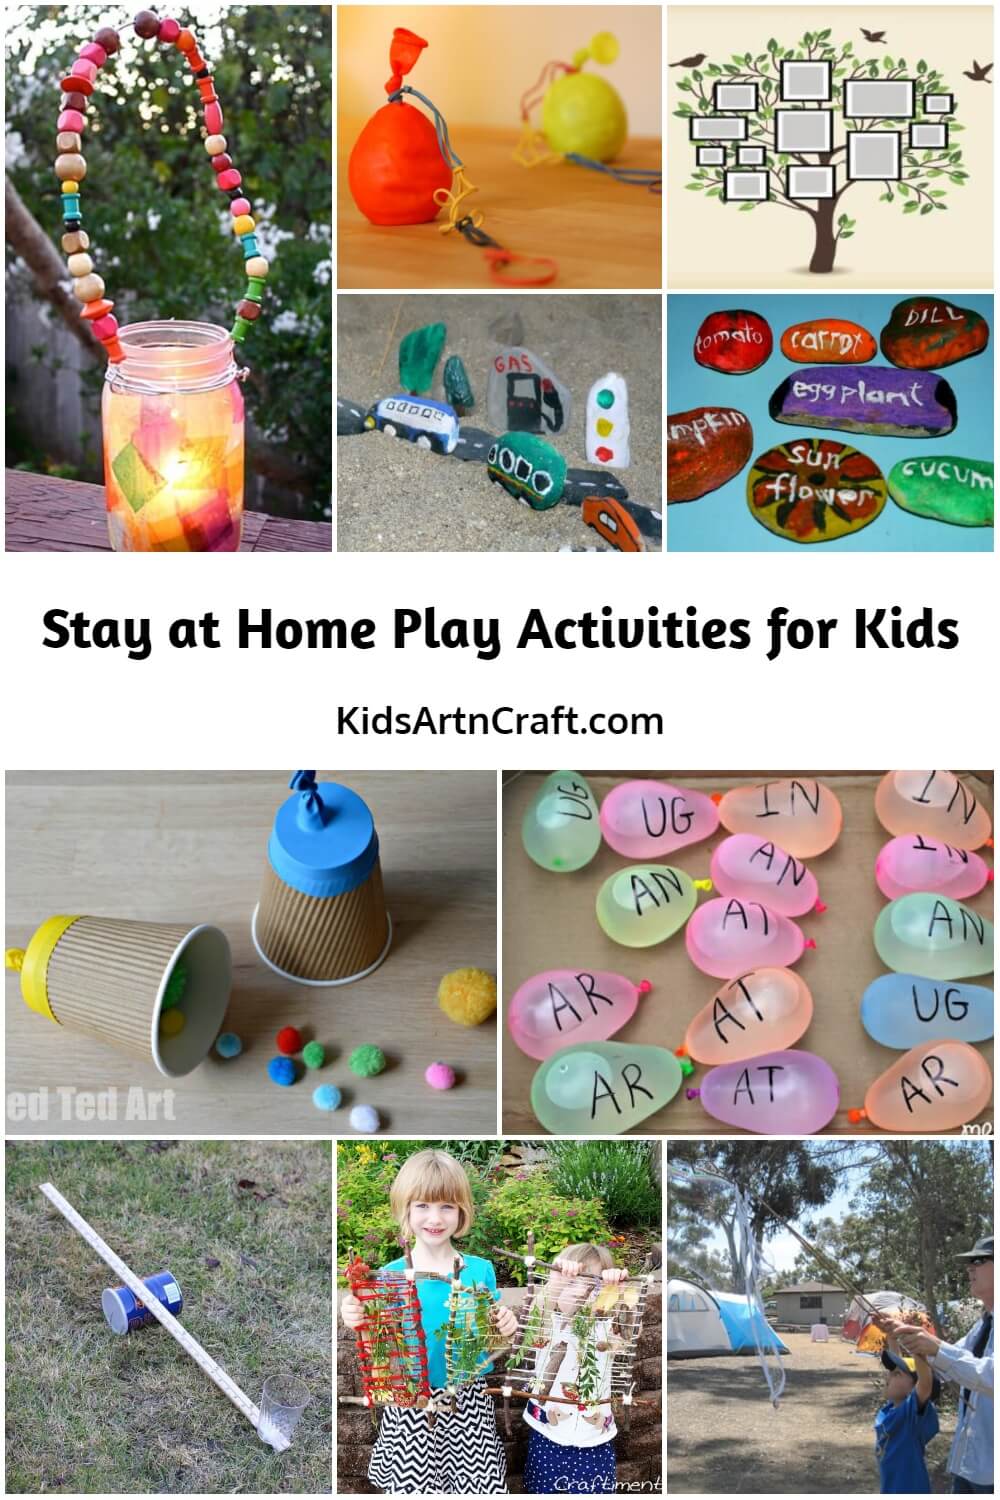 Stay at Home Play Activities for Kids